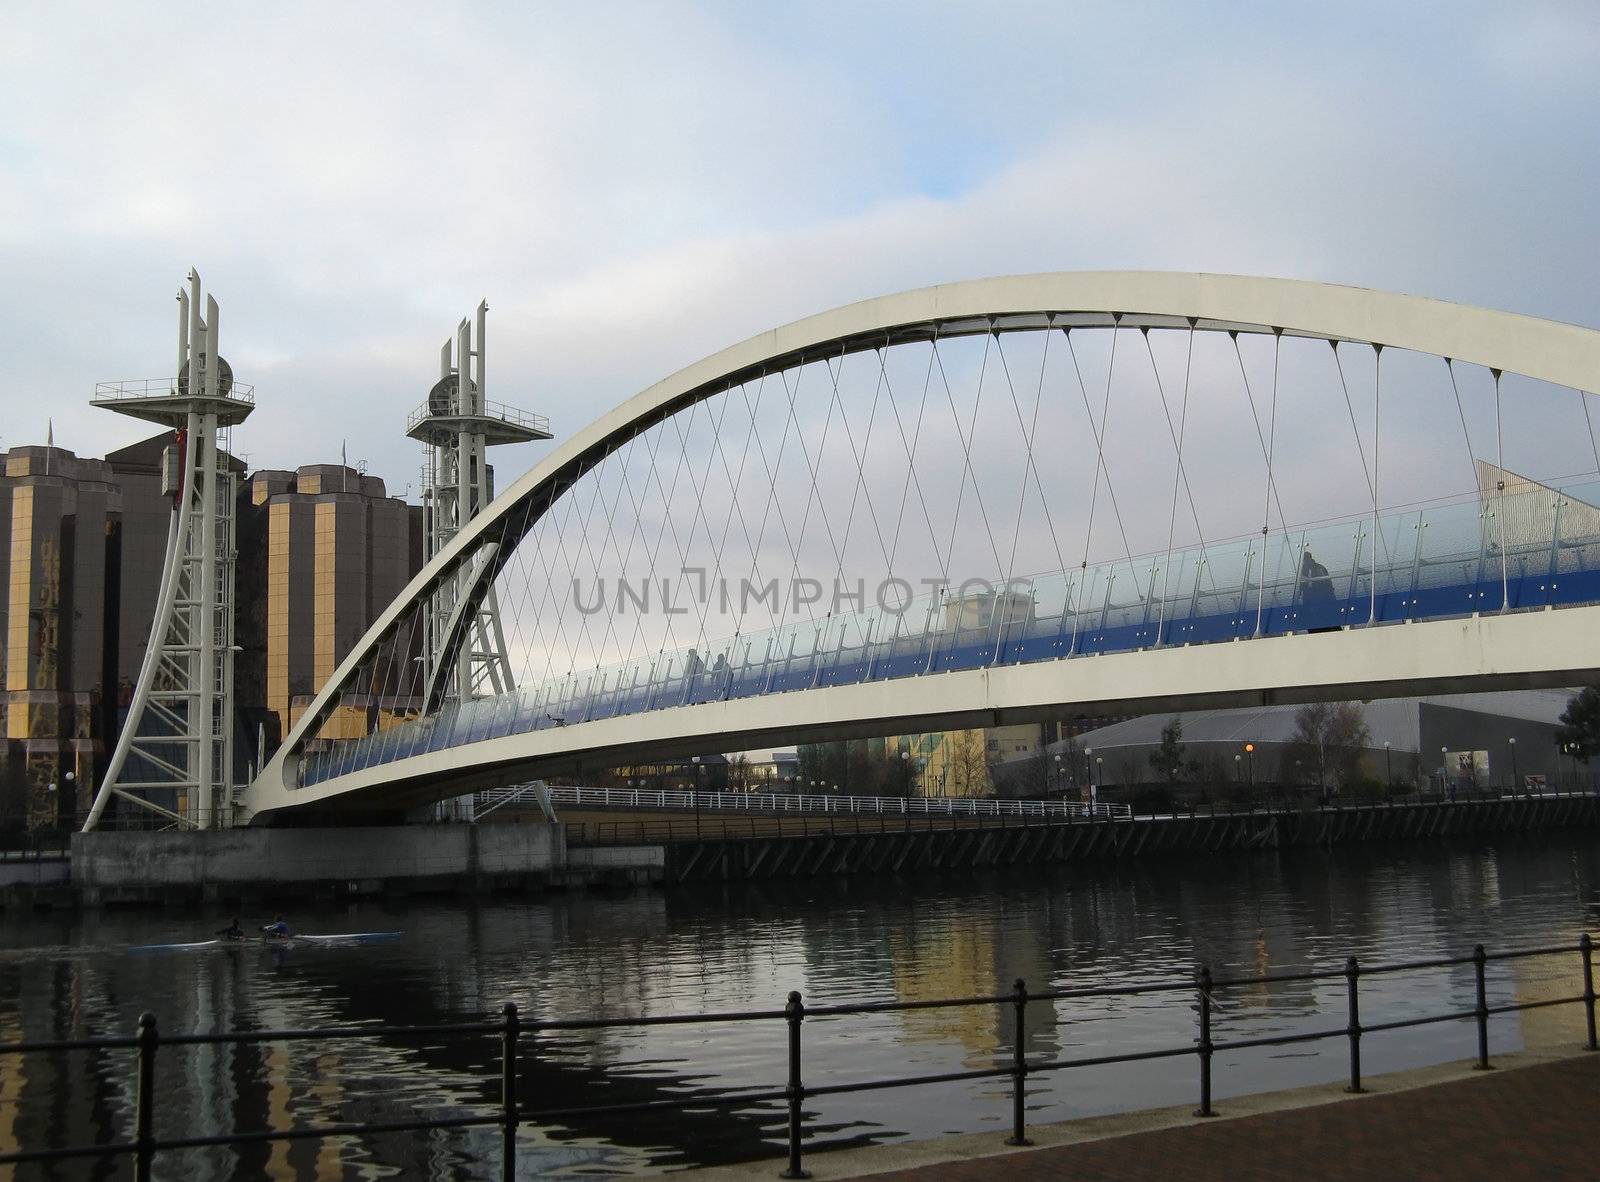  View of the Millennium Lifting Footbridge in Manchester with building reflections on the water.